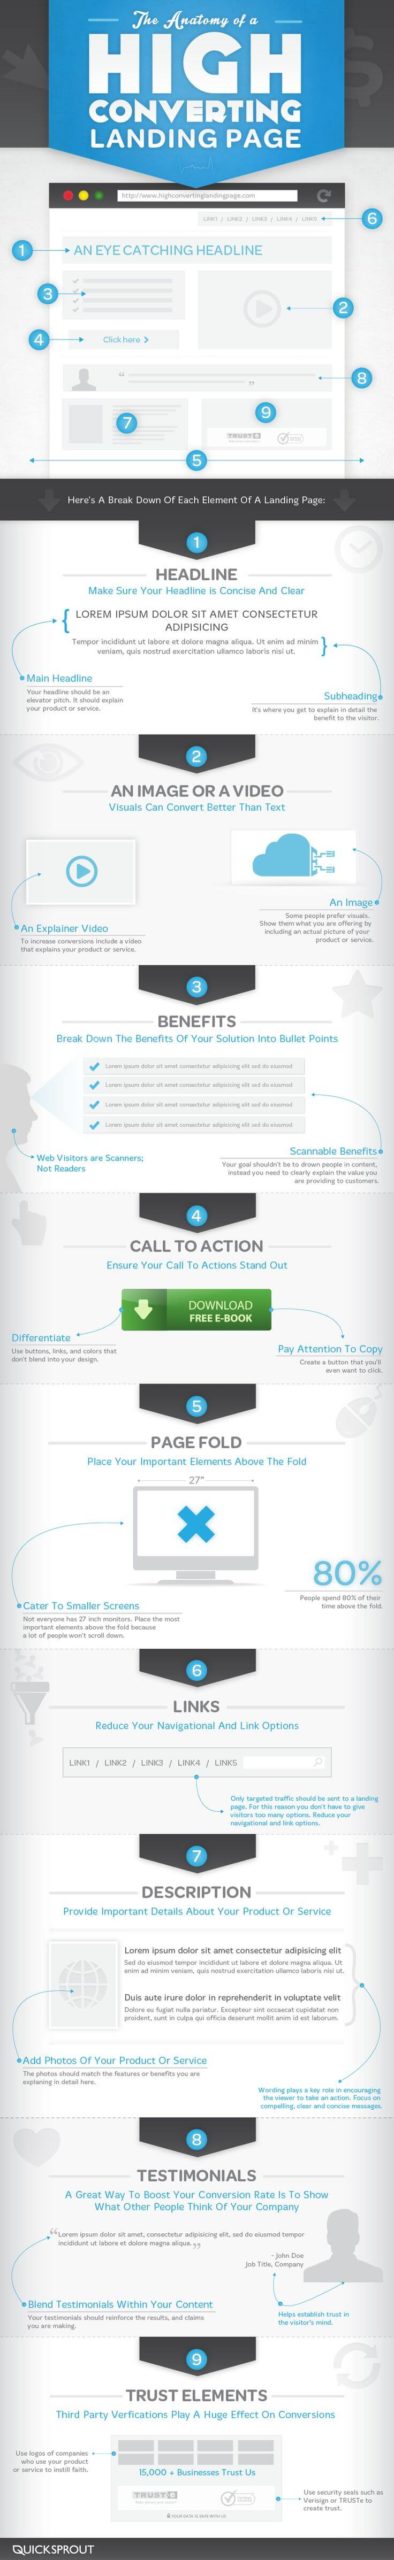 Infographic The Anatomy of a High Converting Landing Page